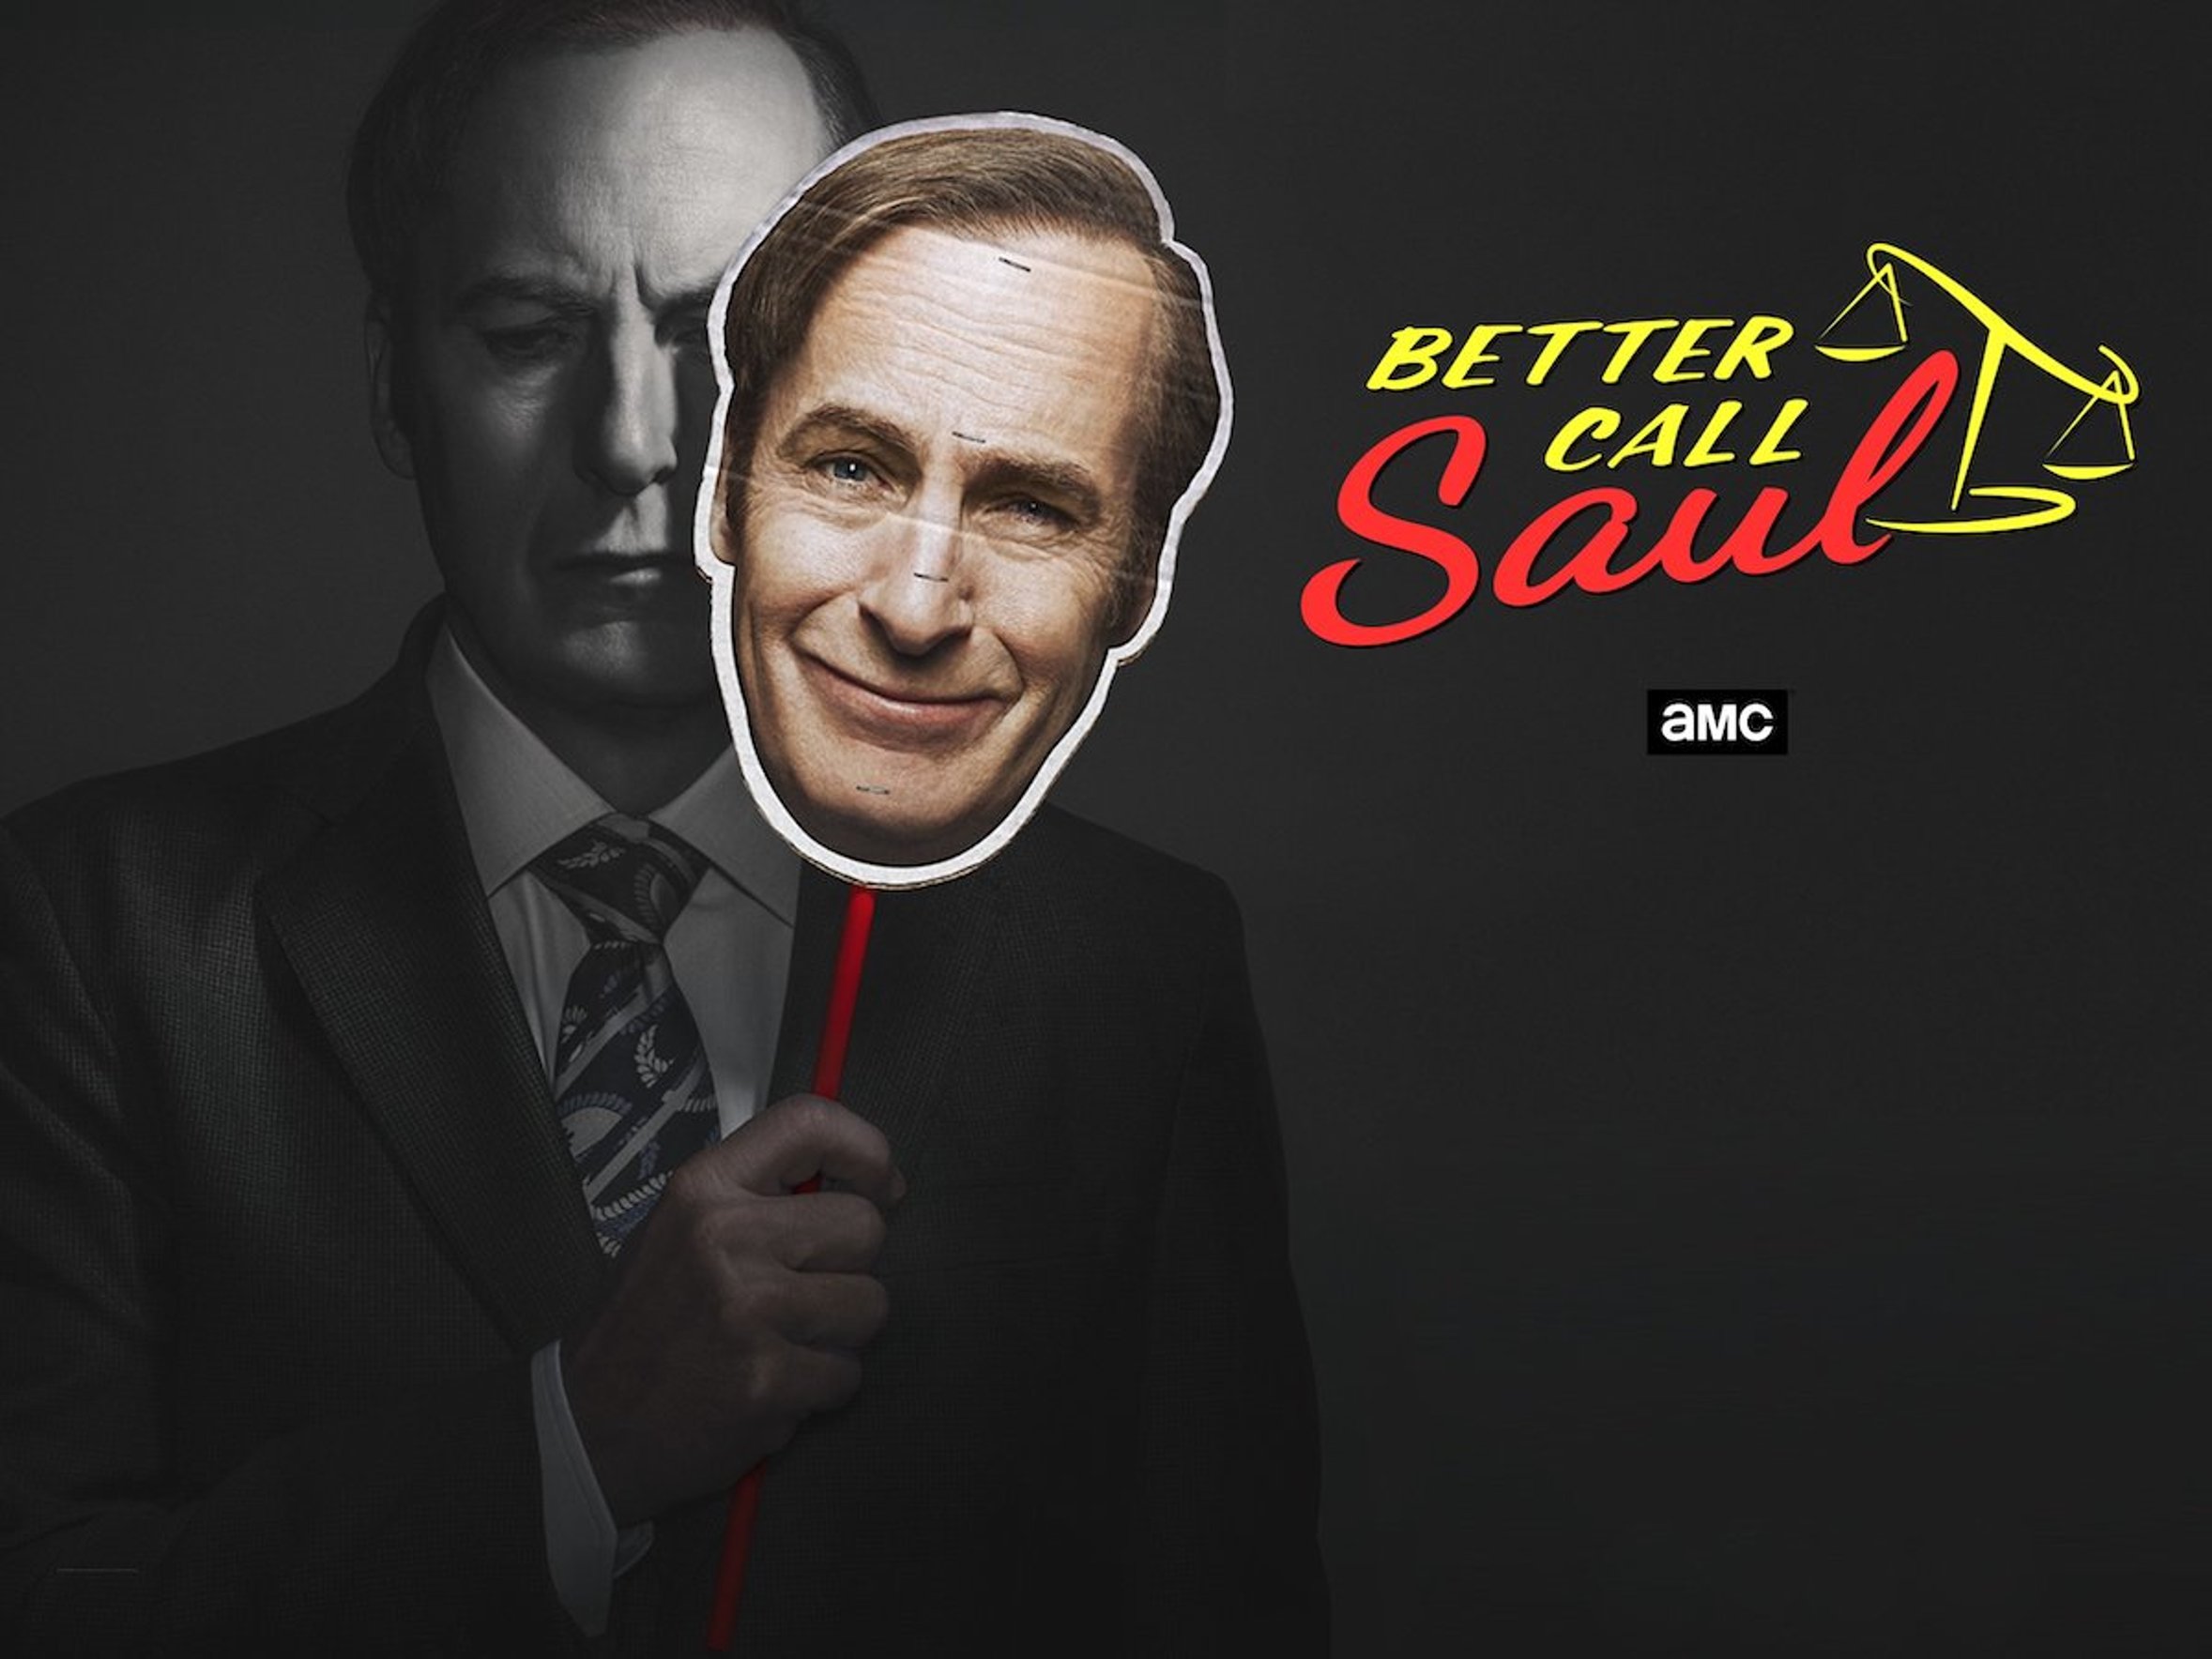 AMC’S Better Call Saul is Casting Featured Roles!